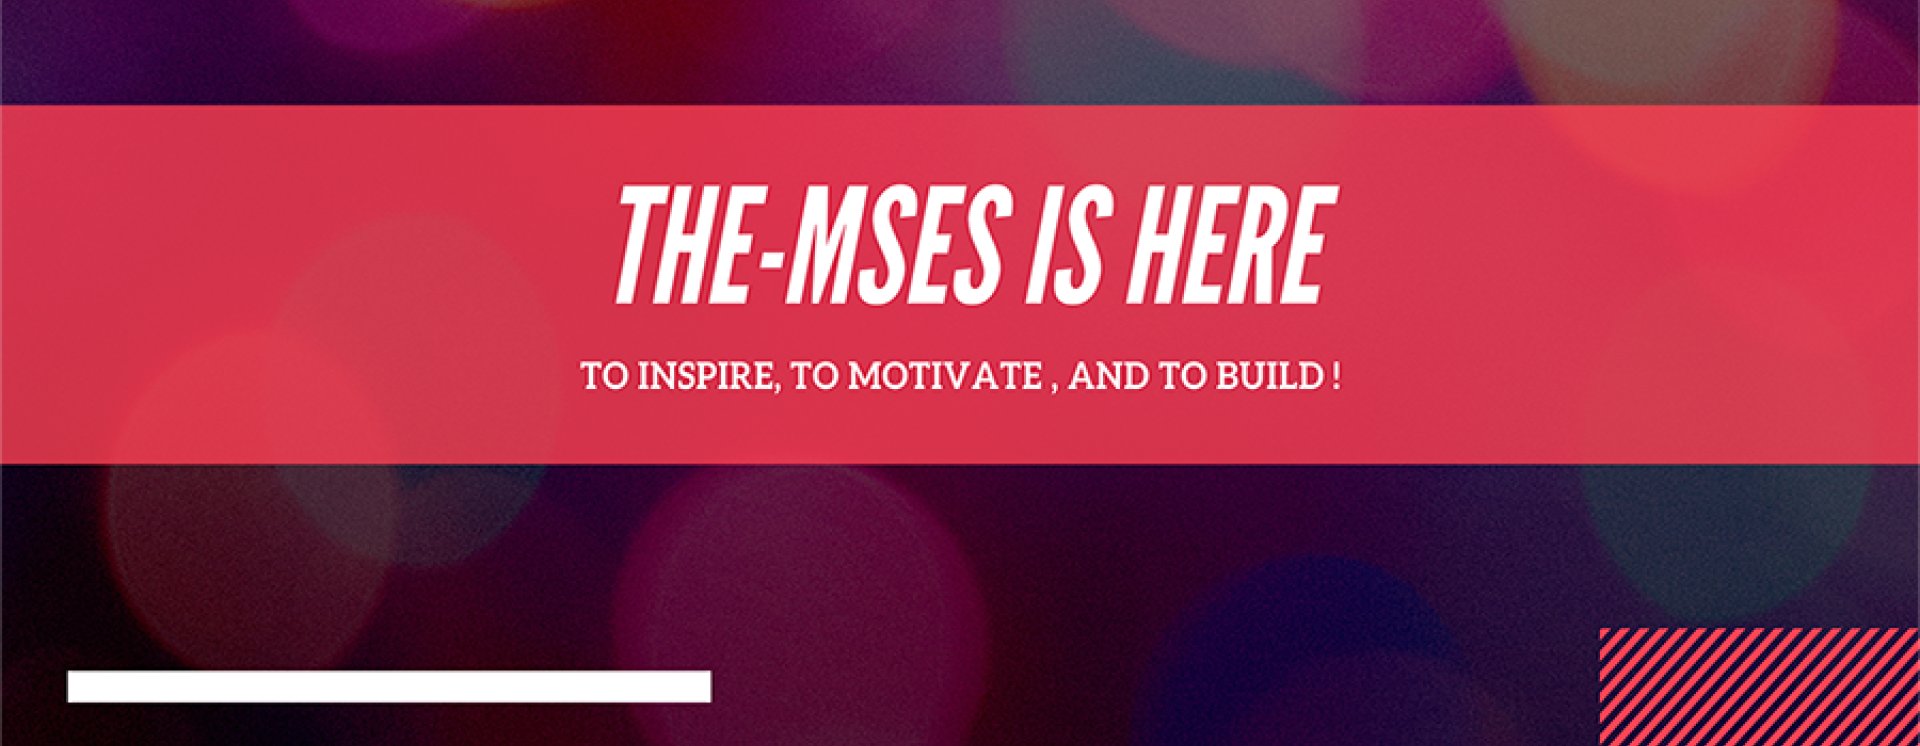 The mses banner re copy